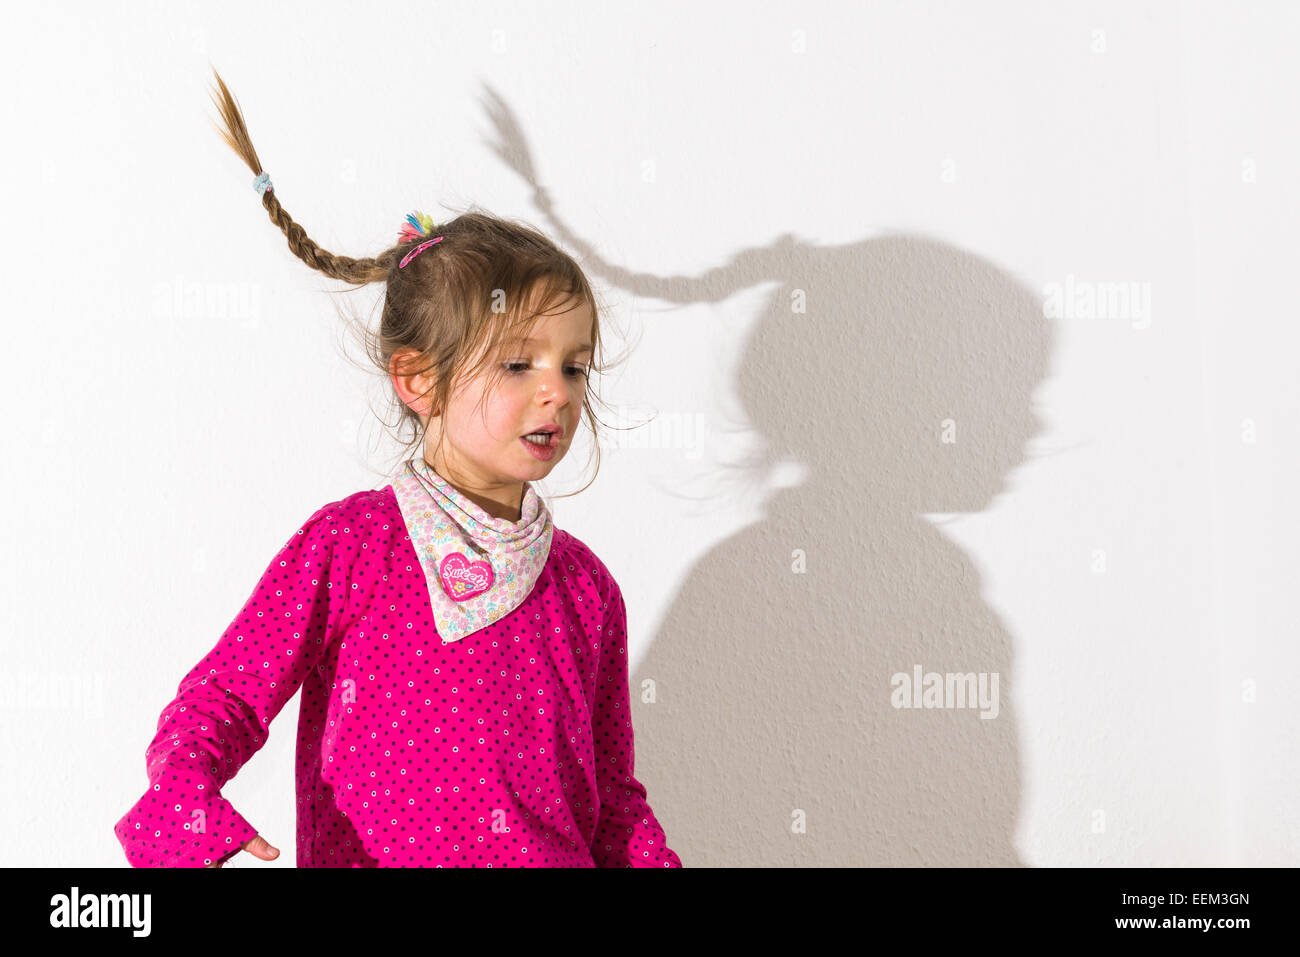 Girl, 3 years, wearing a pink shirt, dancing, casting a shadow on a white wall Stock Photo